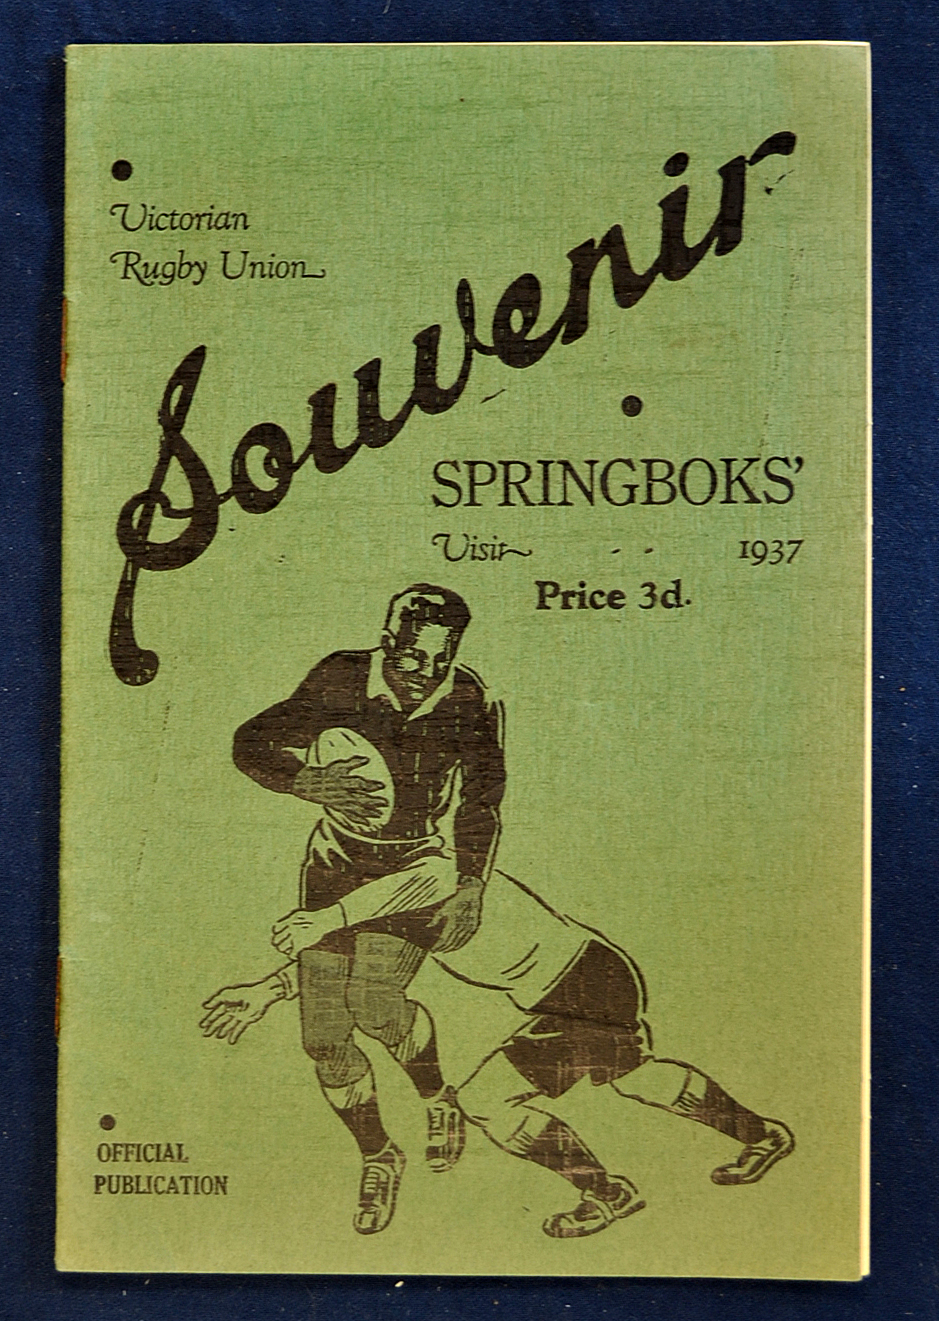 1937 South African Rugby Tour to Australia and New Zealand. 1937 South Africa Springboks v